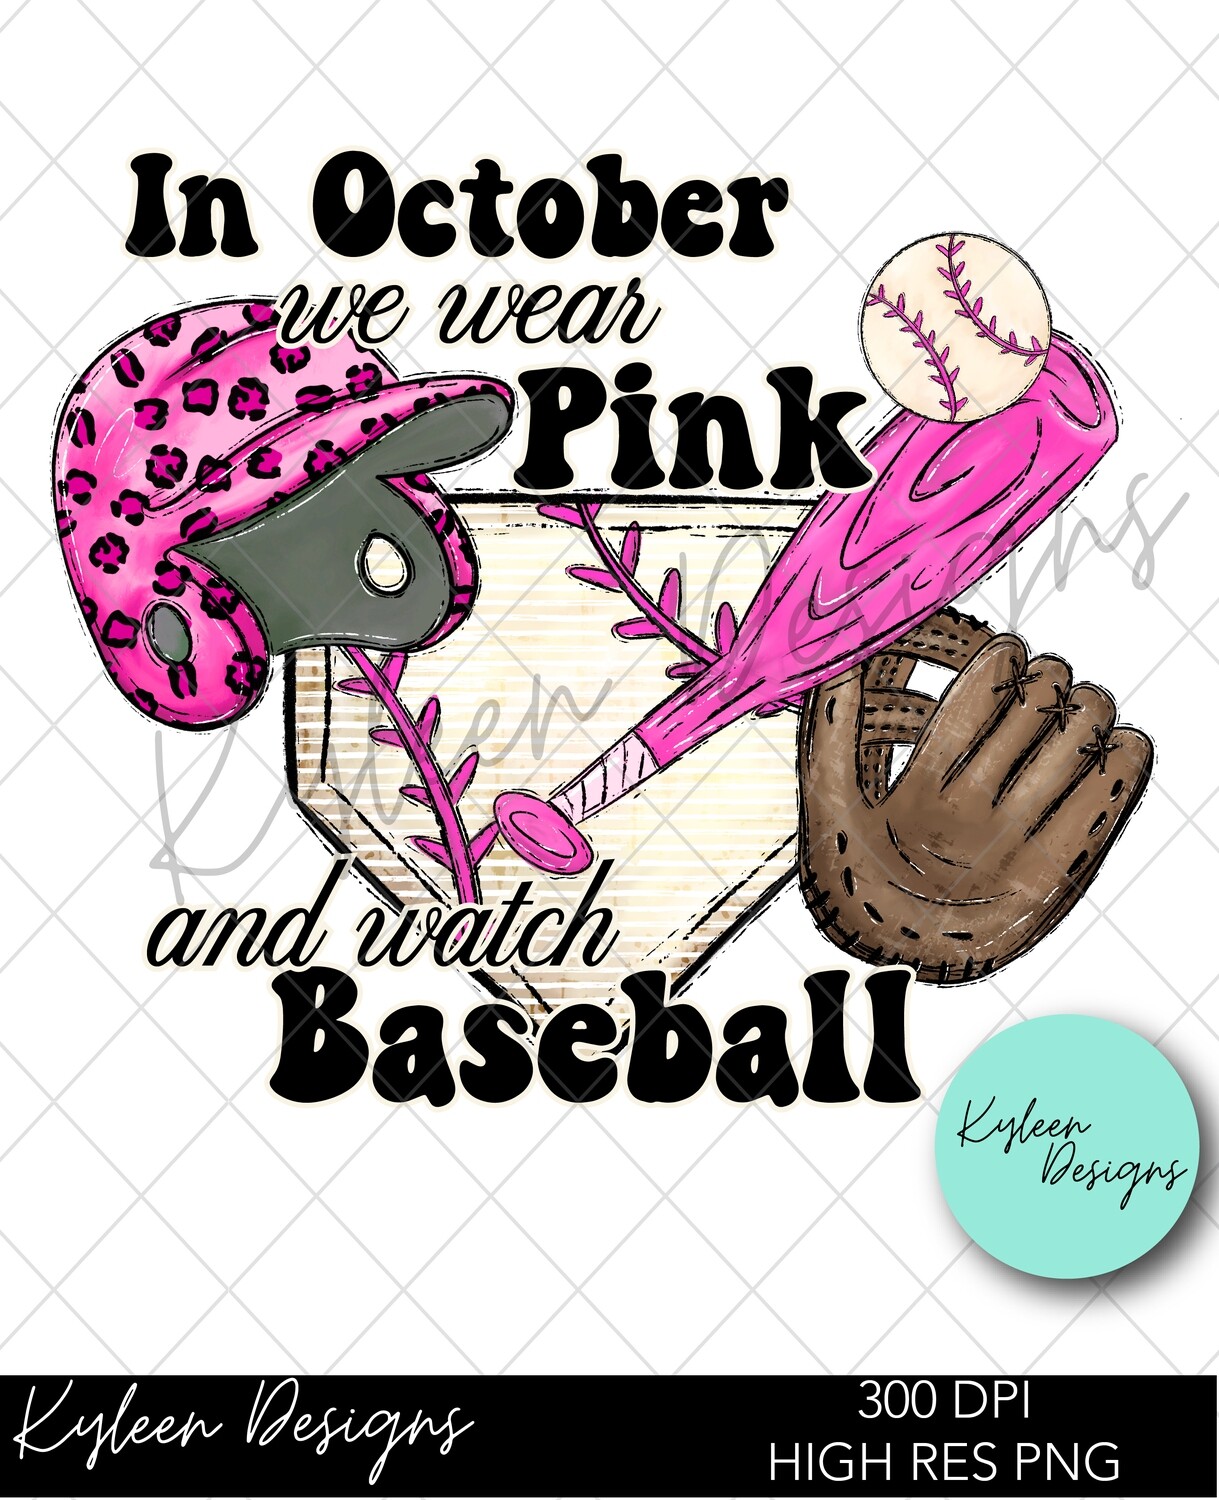 In October we wear pink and watch BASEBALL high res PNG